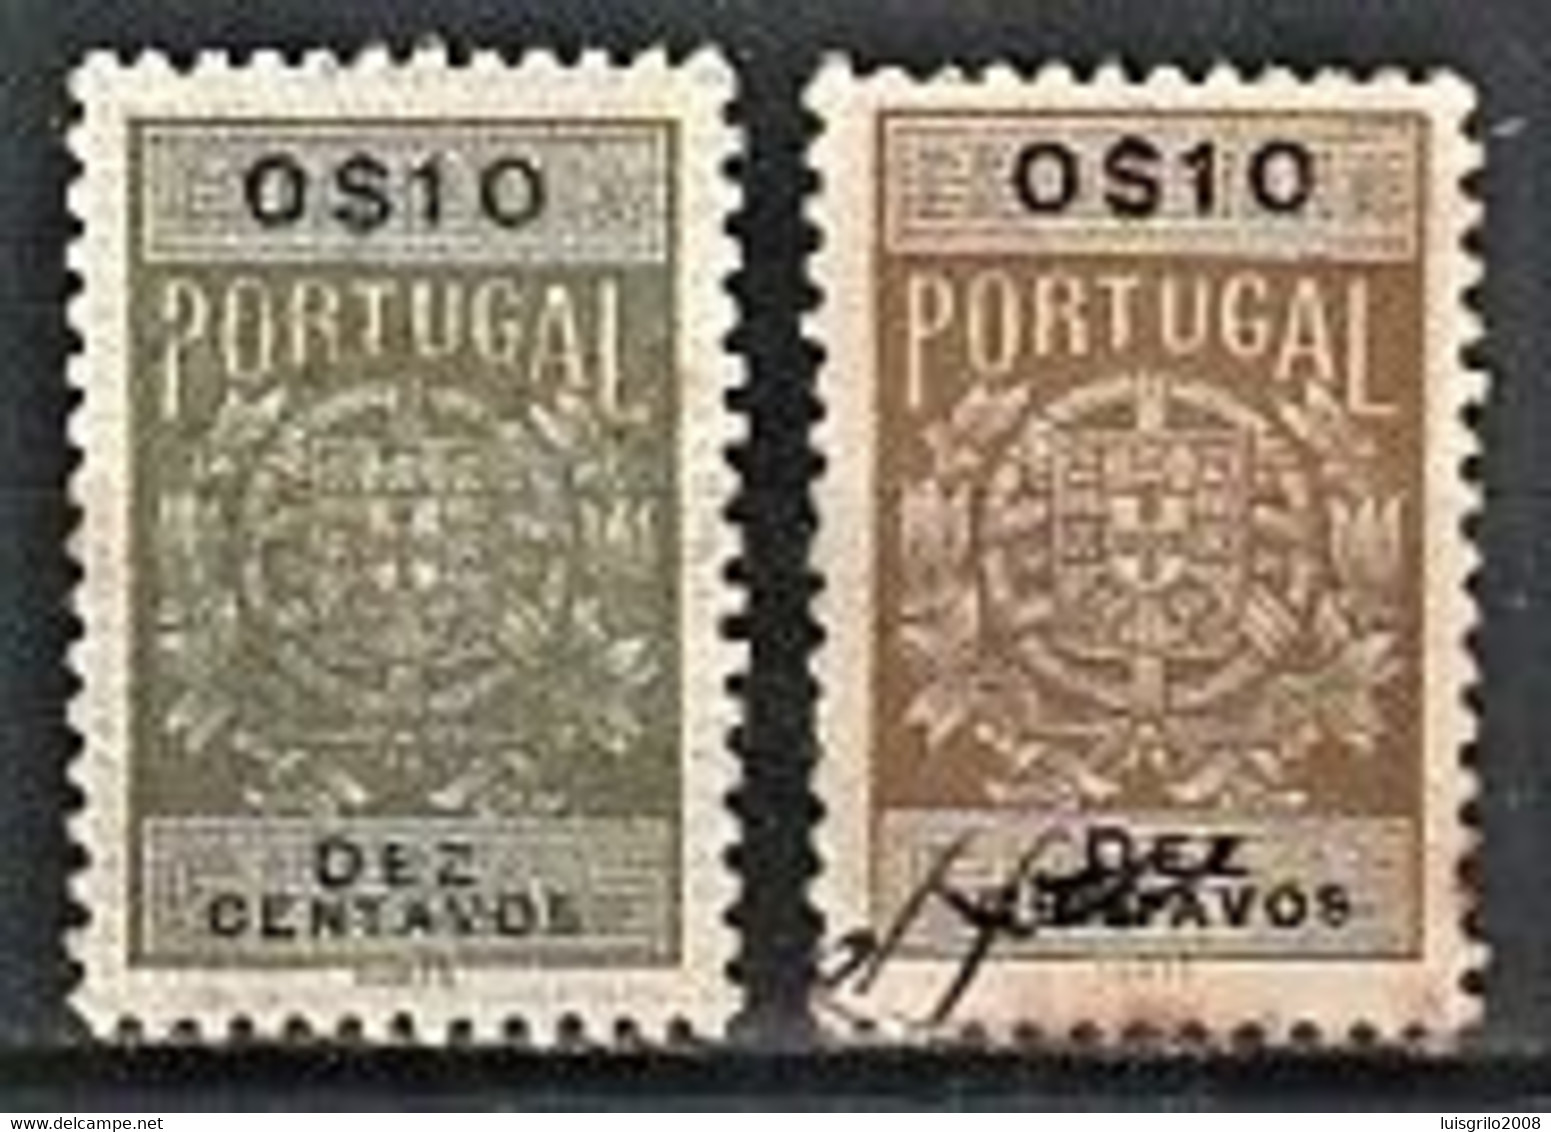 Fiscal/ Revenue, Portugal 1940 - Estampilha Fiscal -|- 0$10 - COLOR VARIANT - Is The Stamp Of The Right - Usati